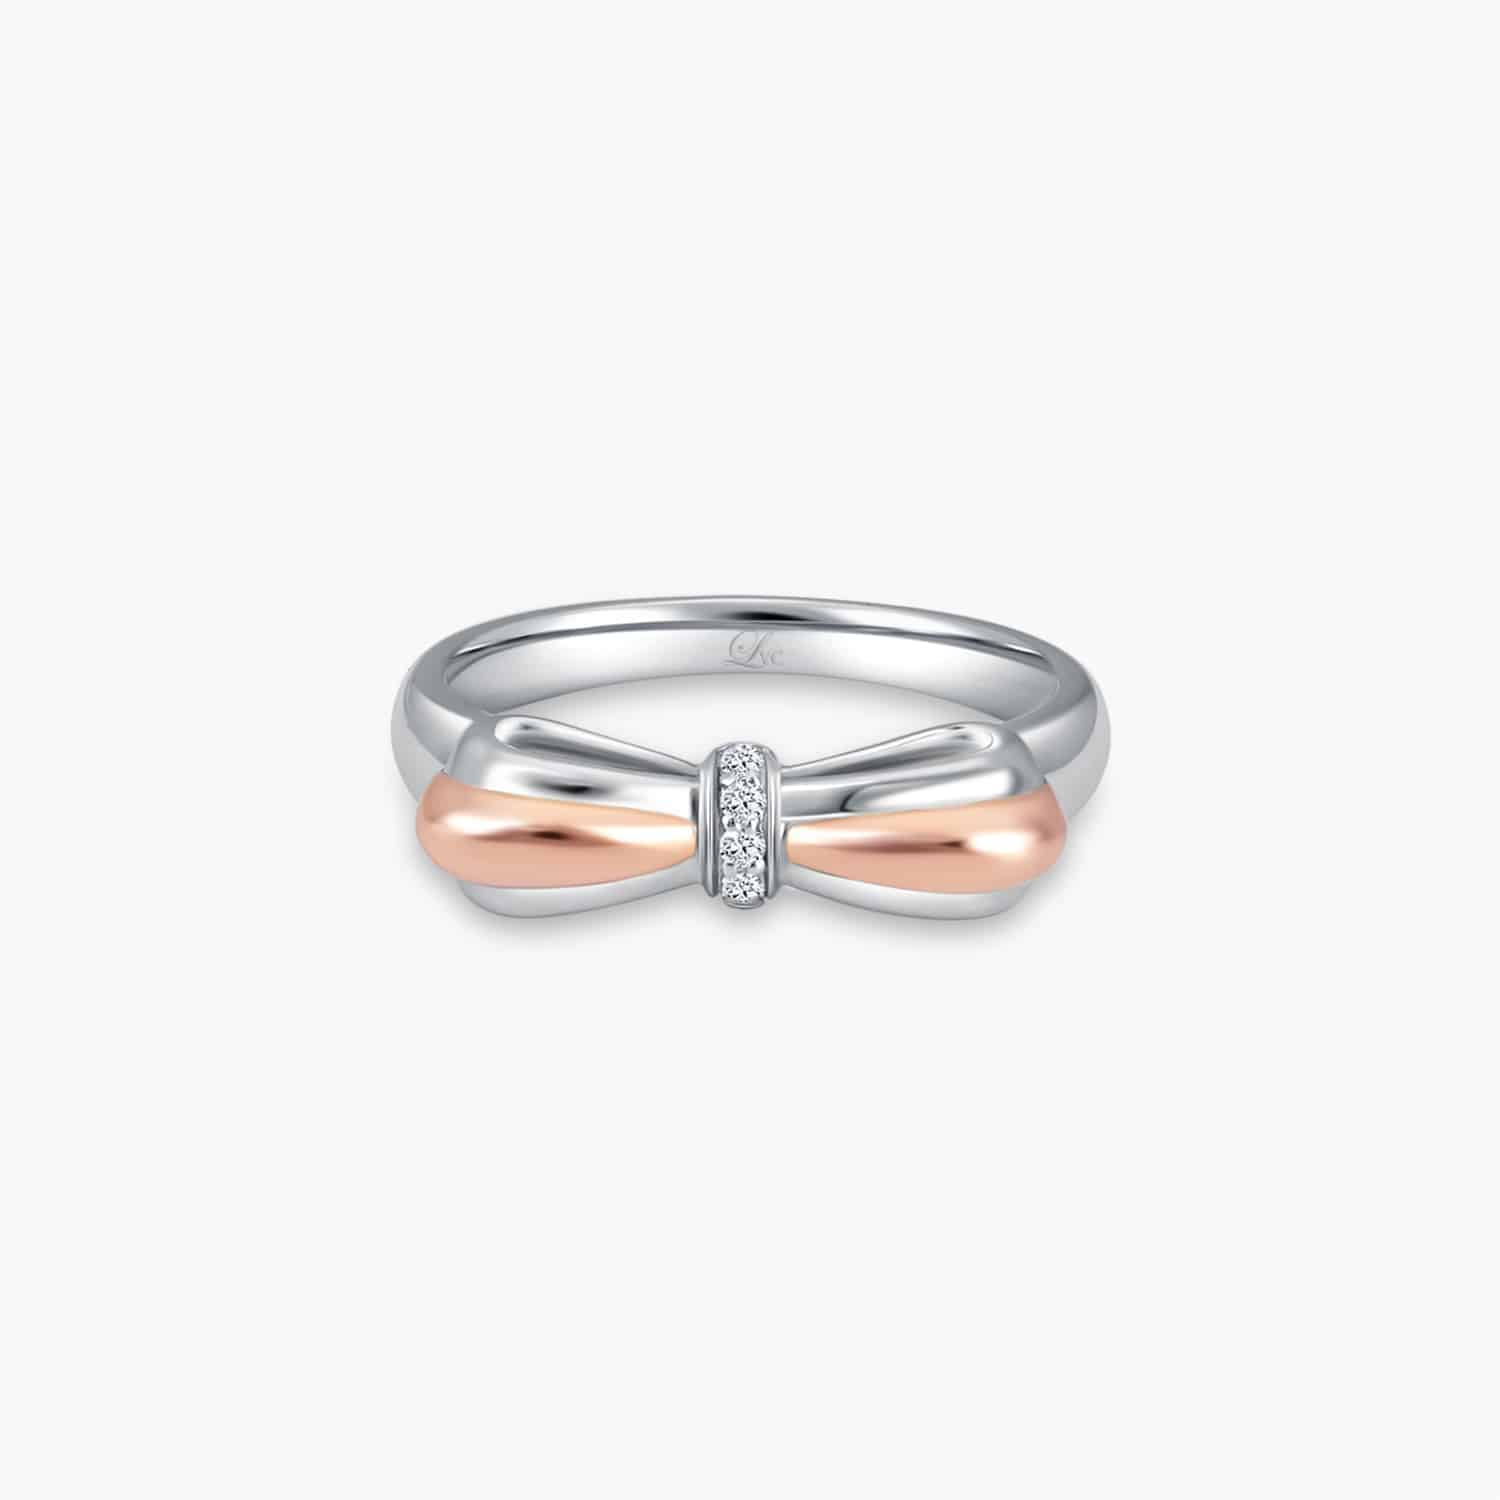 LVC NOEUD BOND WEDDING BAND WITH ROSE GOLD BOW AND DIAMONDS ENCRUSTED KNOT a wedding band for women in white and rose gold with 5 diamonds 钻石 戒指 cincin diamond